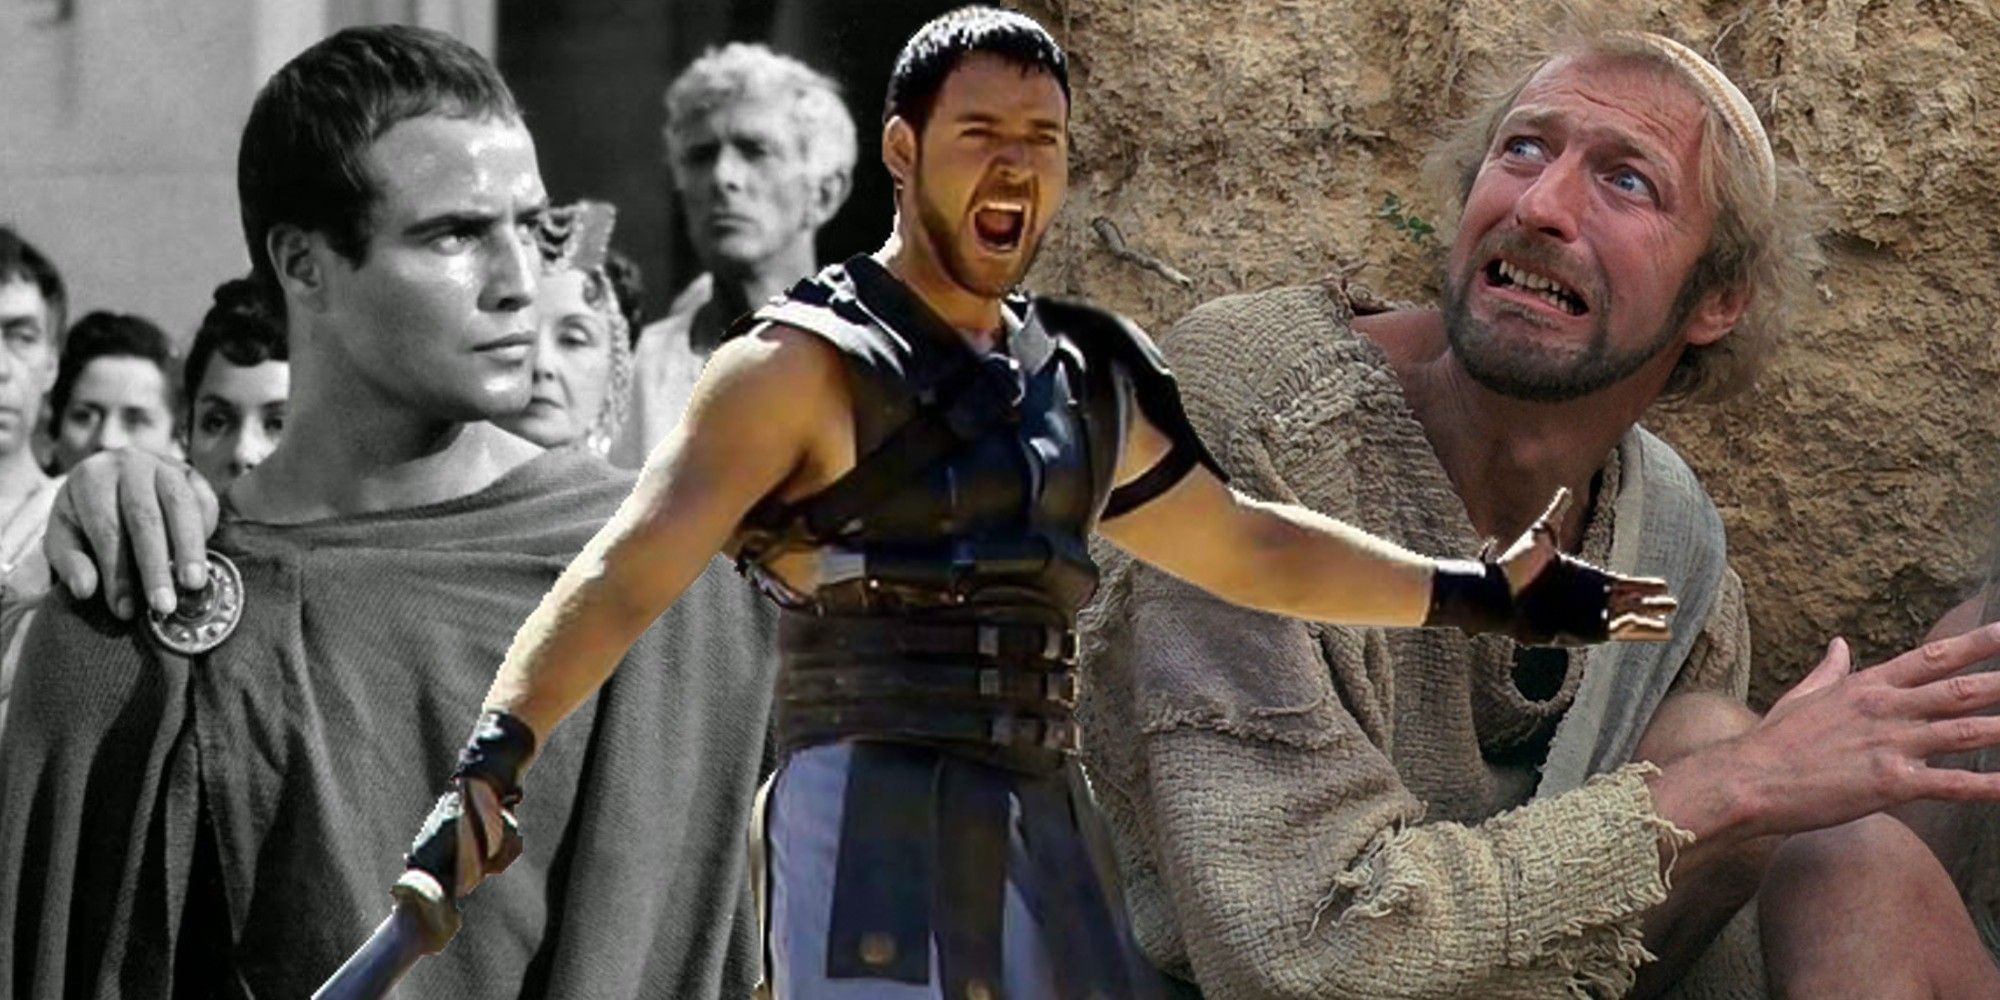 The best Roman movies span the history of cinema itself, delivering many landmark moments along the way.